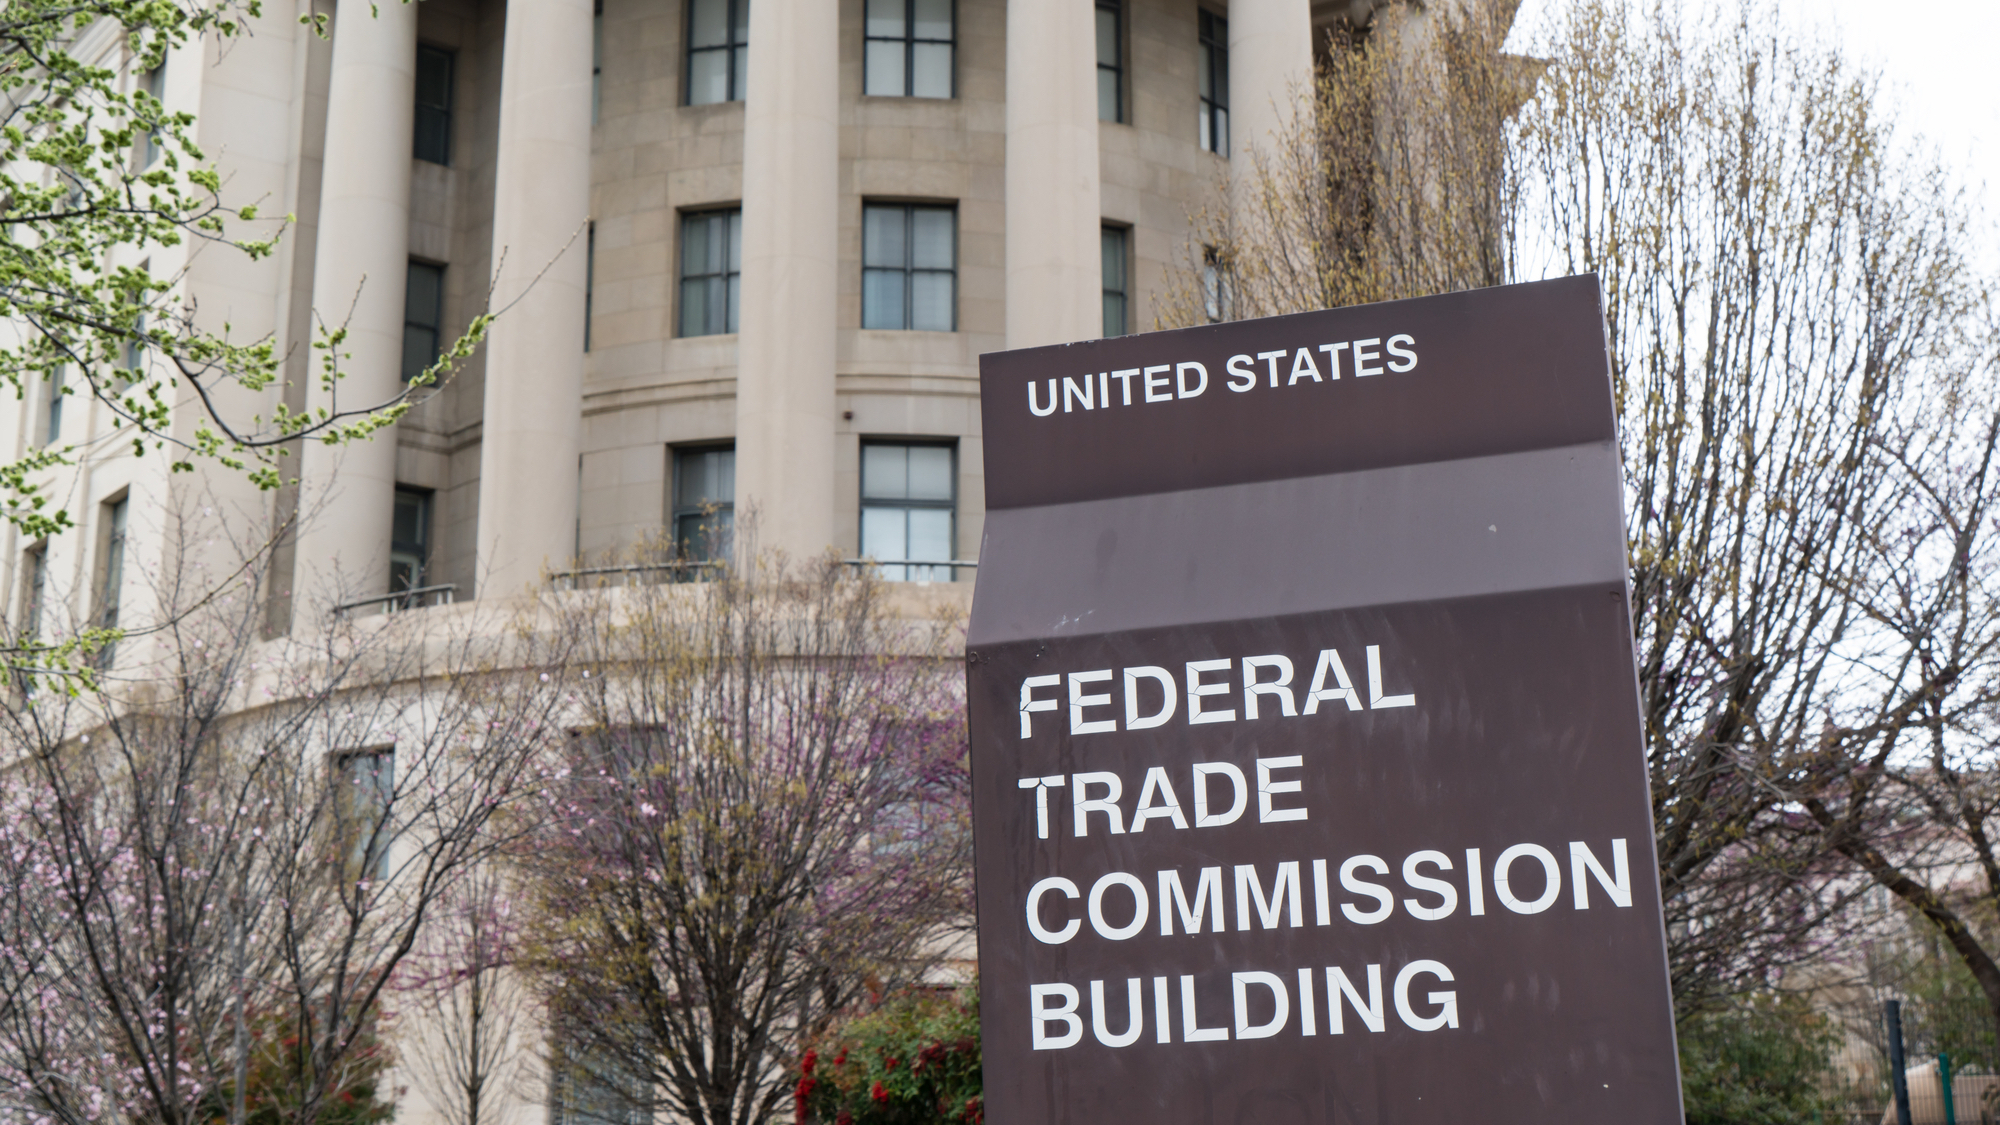 Outdoor photo of FTC building exterior with sign